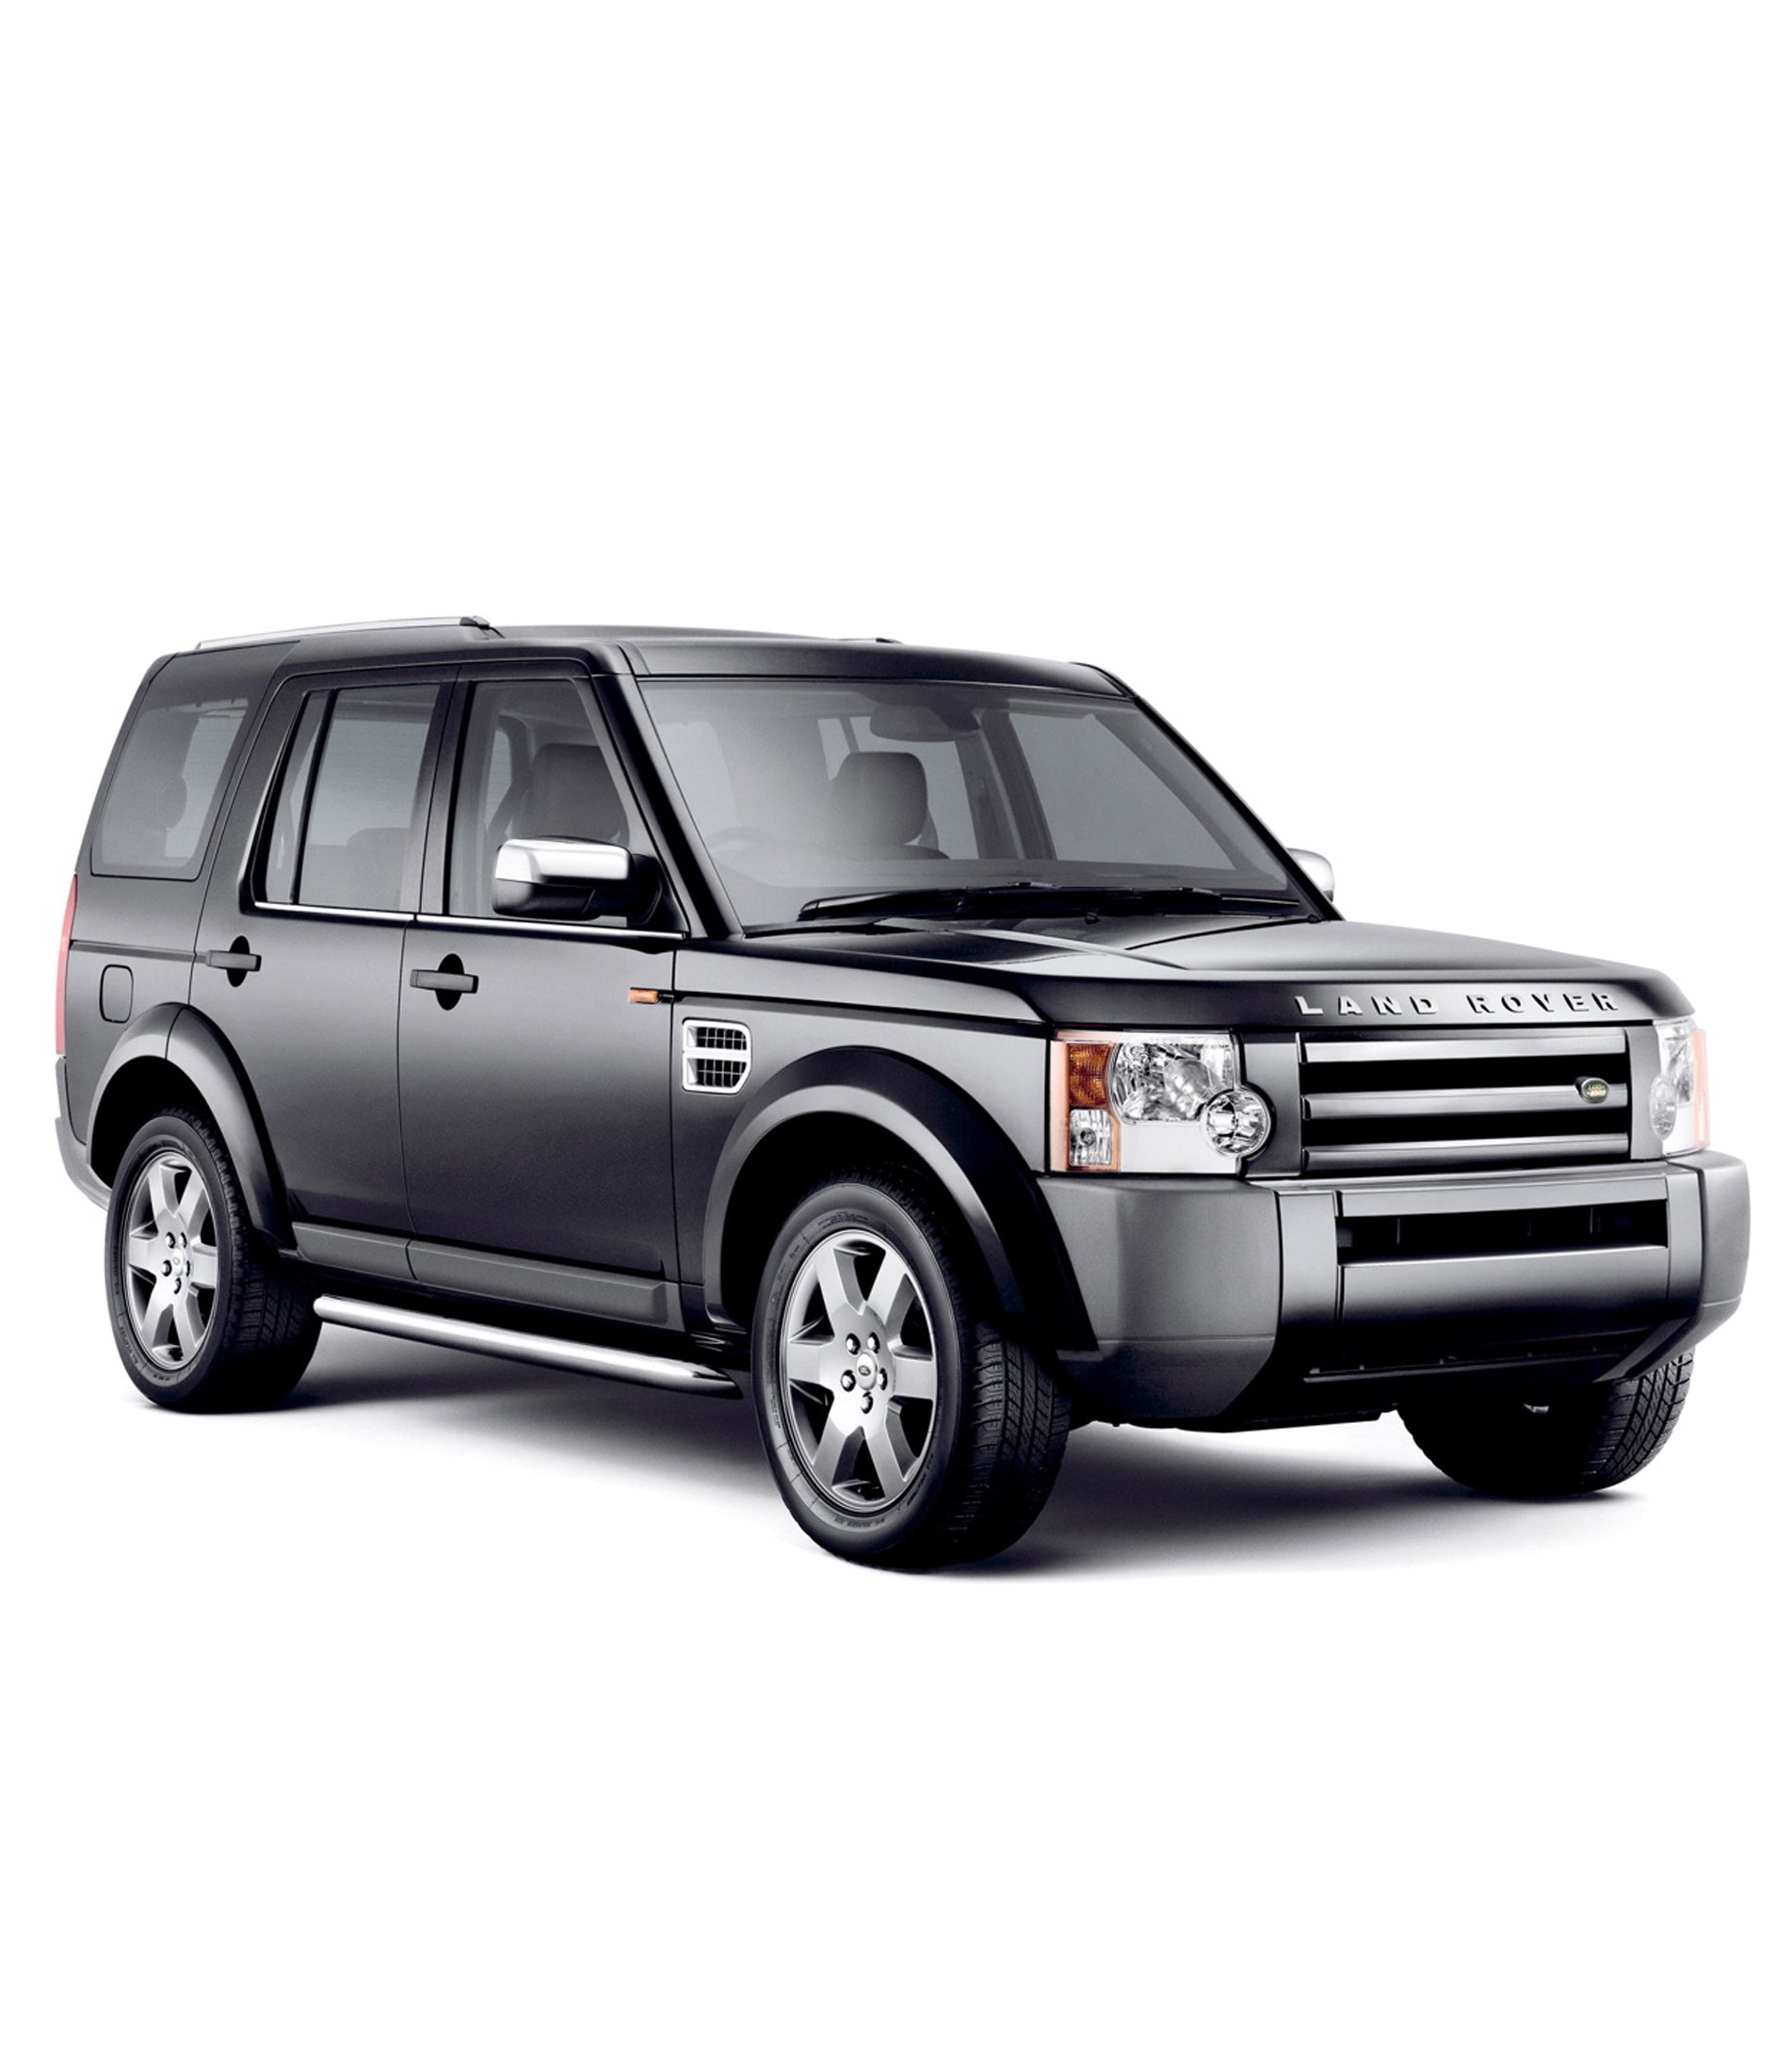 Land Rover Discovery 3 Full Set UK Covers